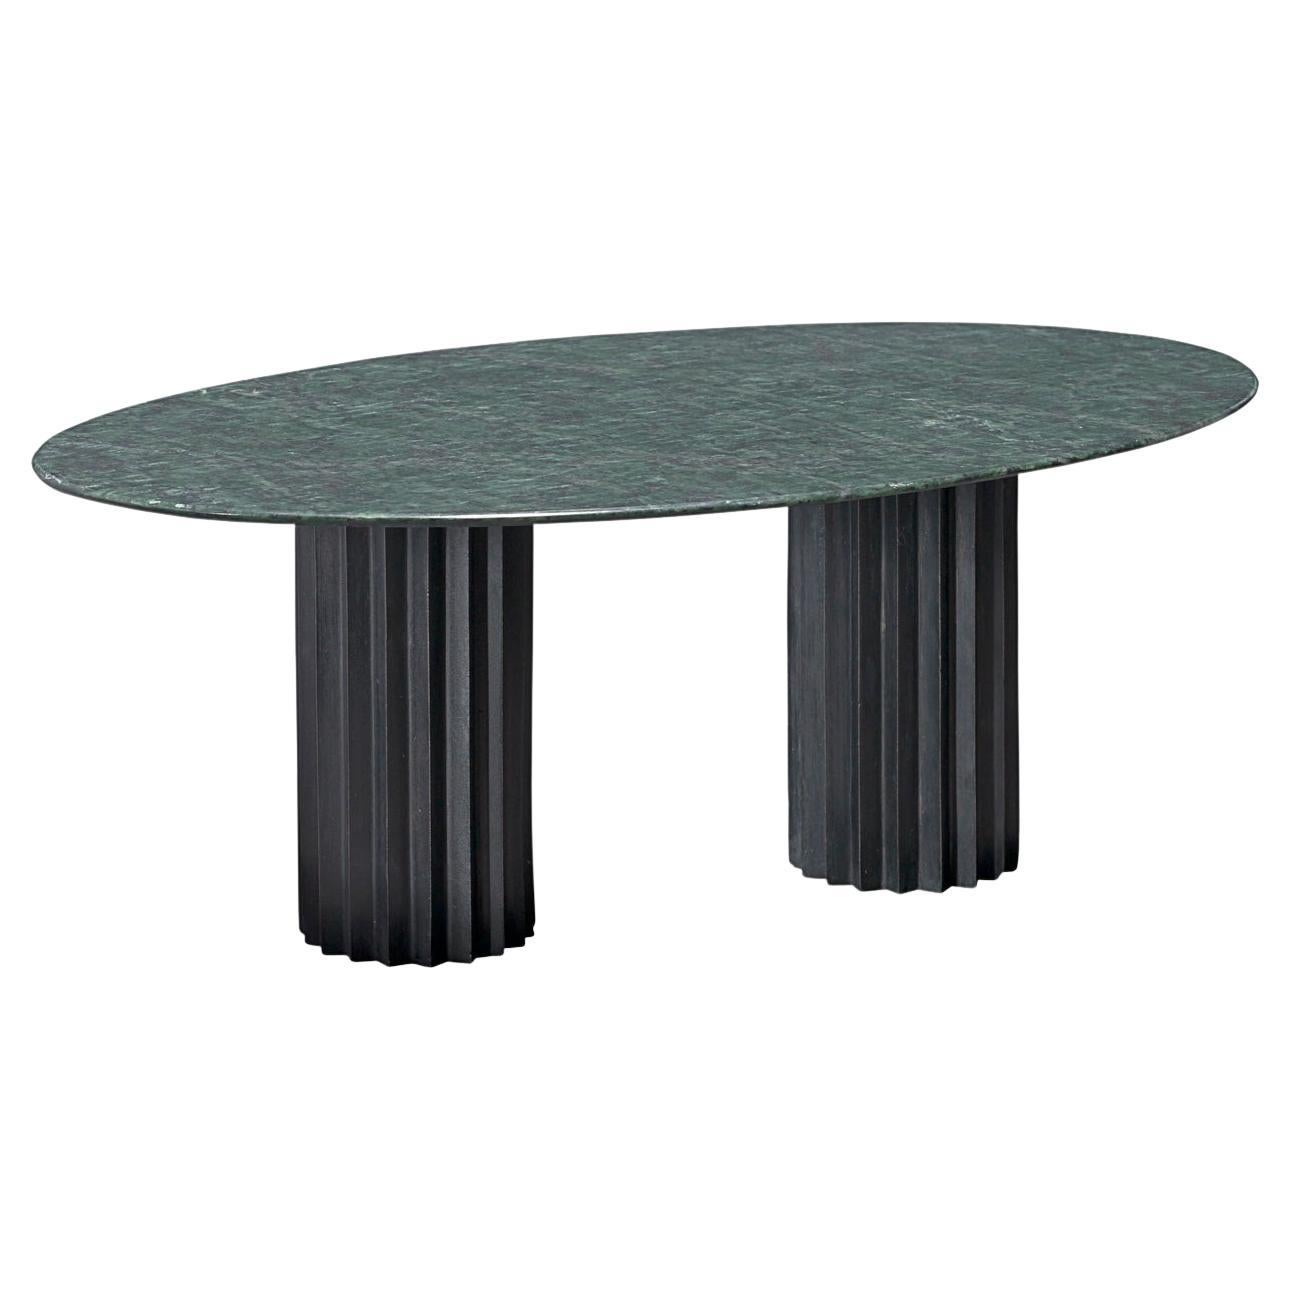 Doris Green Serpentino Marble Oval Dining Table by Fred and Juul